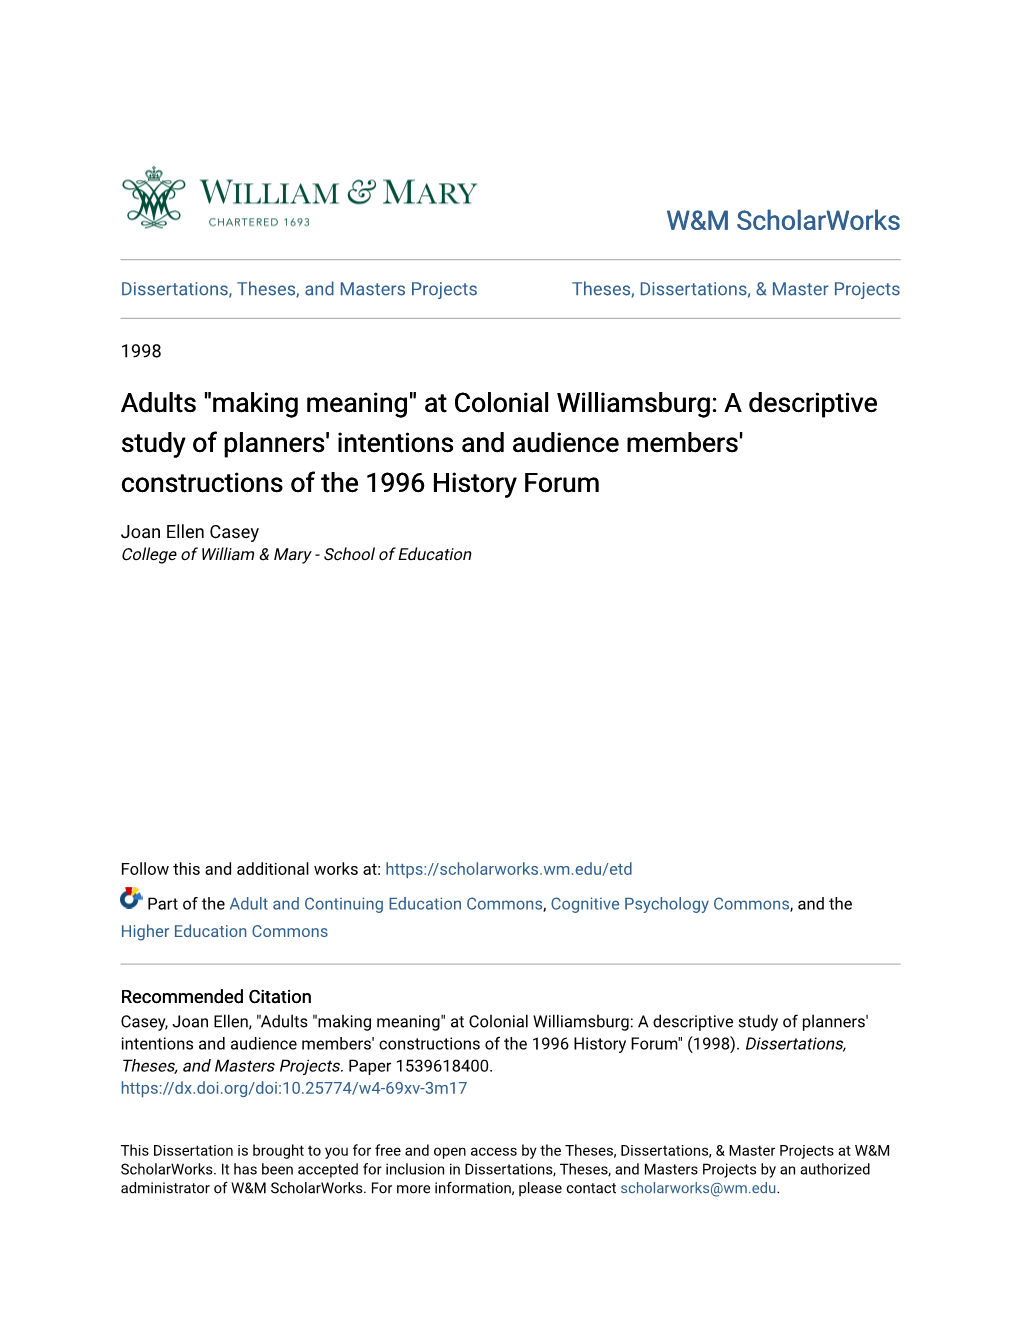 At Colonial Williamsburg: a Descriptive Study of Planners' Intentions and Audience Members' Constructions of the 1996 History Forum